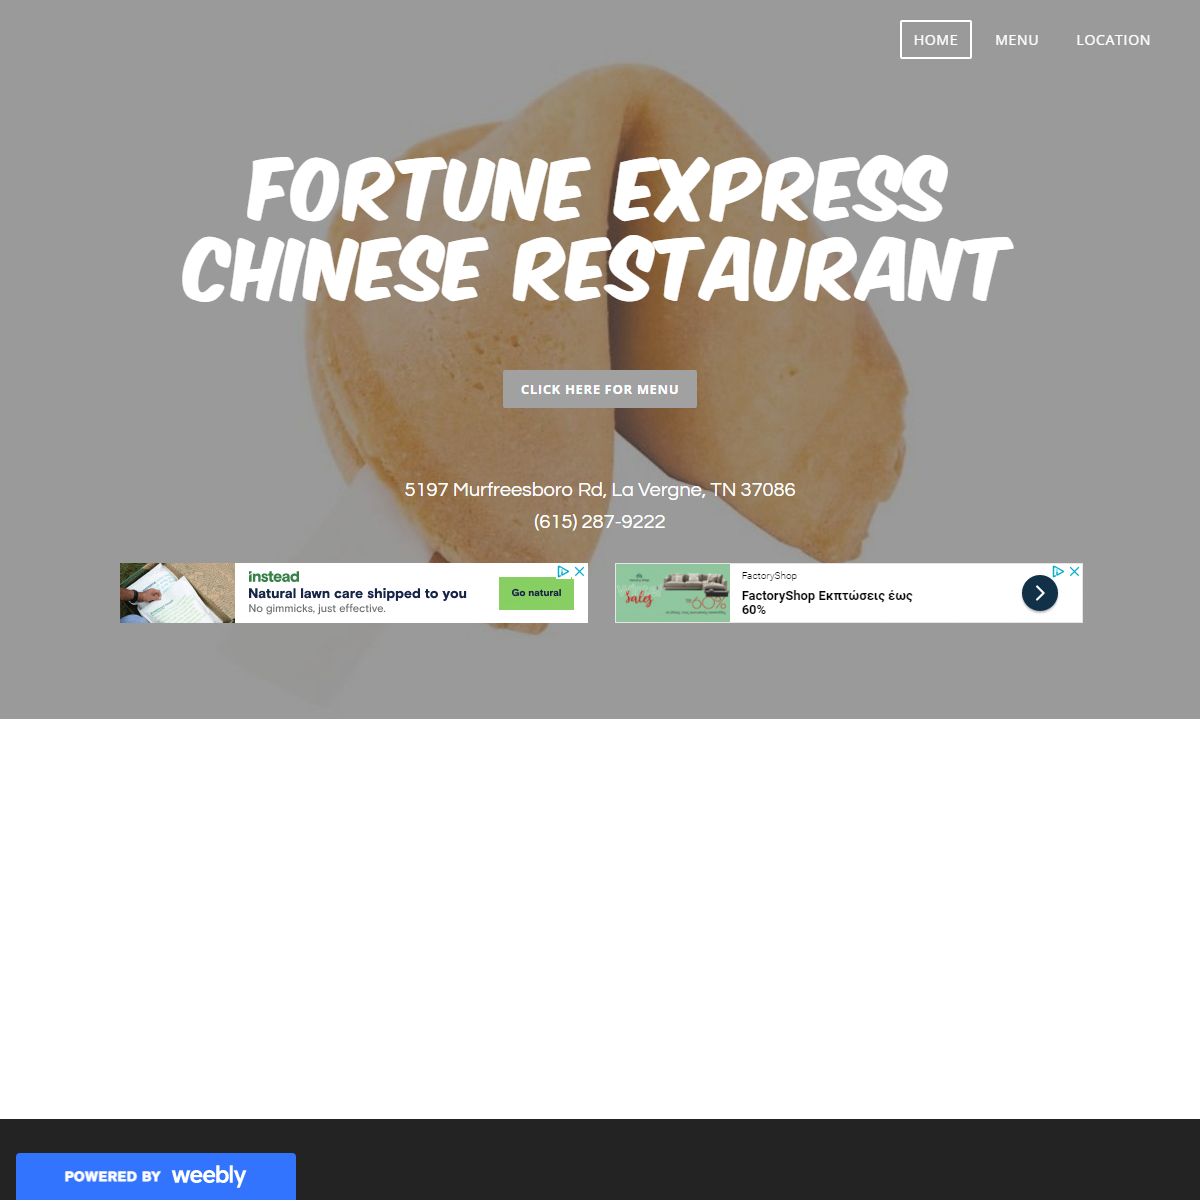 A complete backup of http://fortuneexpress.weebly.com/